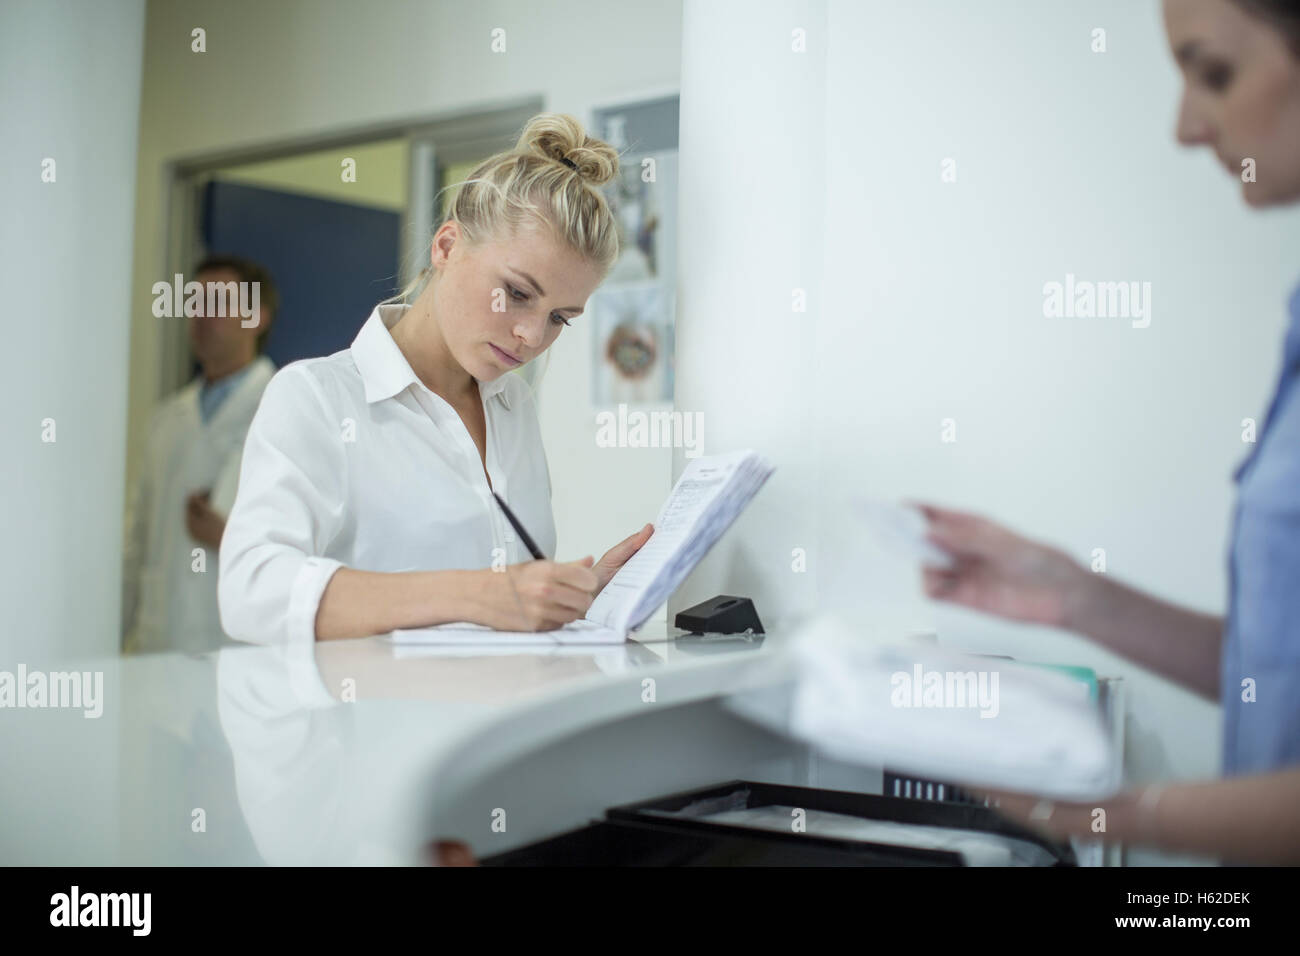 Woman writing in book at reception Stock Photo